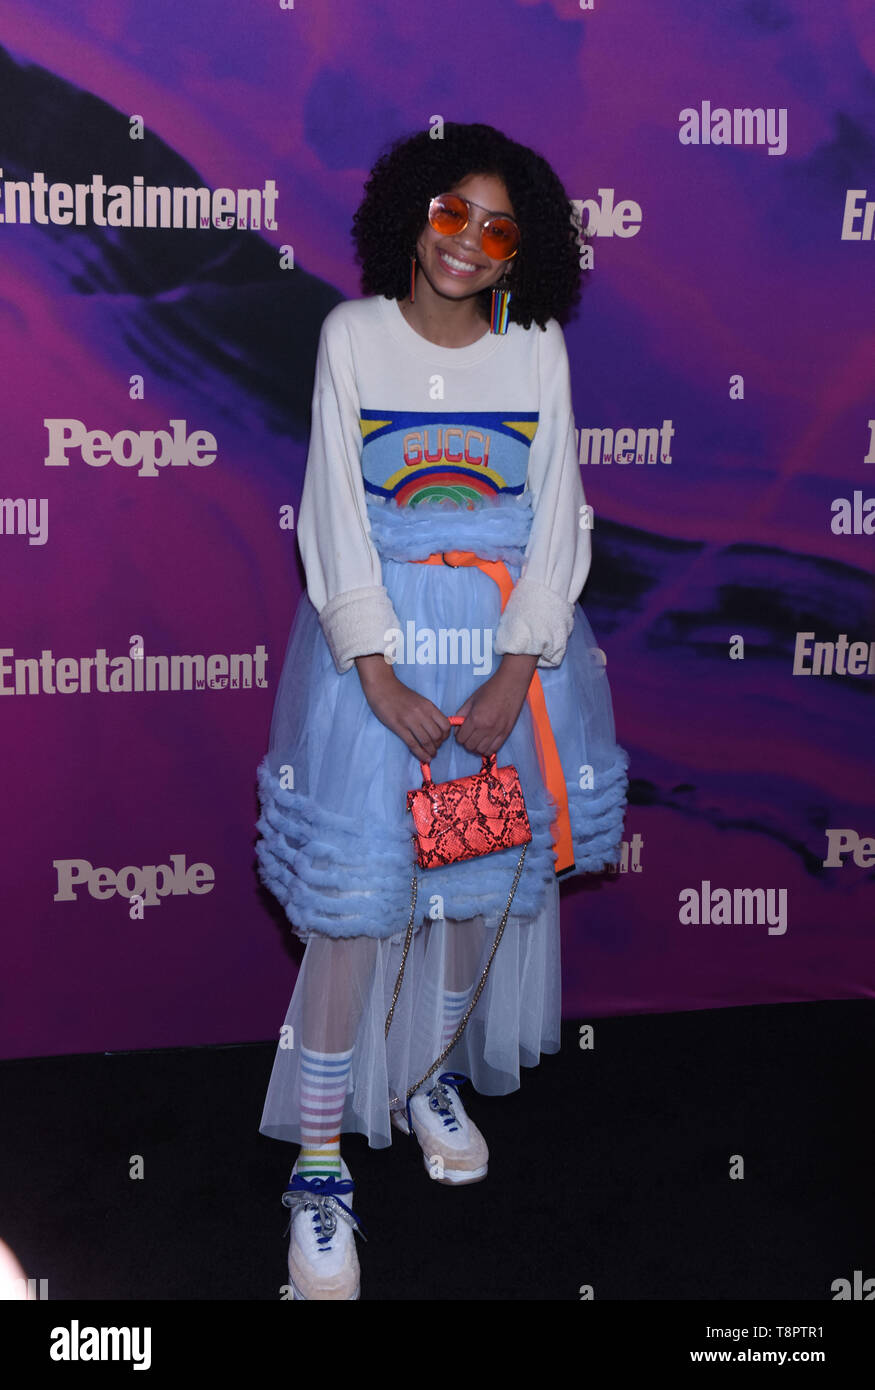 NEW YORK NEW YORK - 13 Maggio: Arica Himmel assiste le persone & Entertainment Weekly 2019 Upfronts all Unione Park il 13 maggio 2019 in New York City. Foto: Jeremy Smith/imageSPACE/MediaPunch Foto Stock